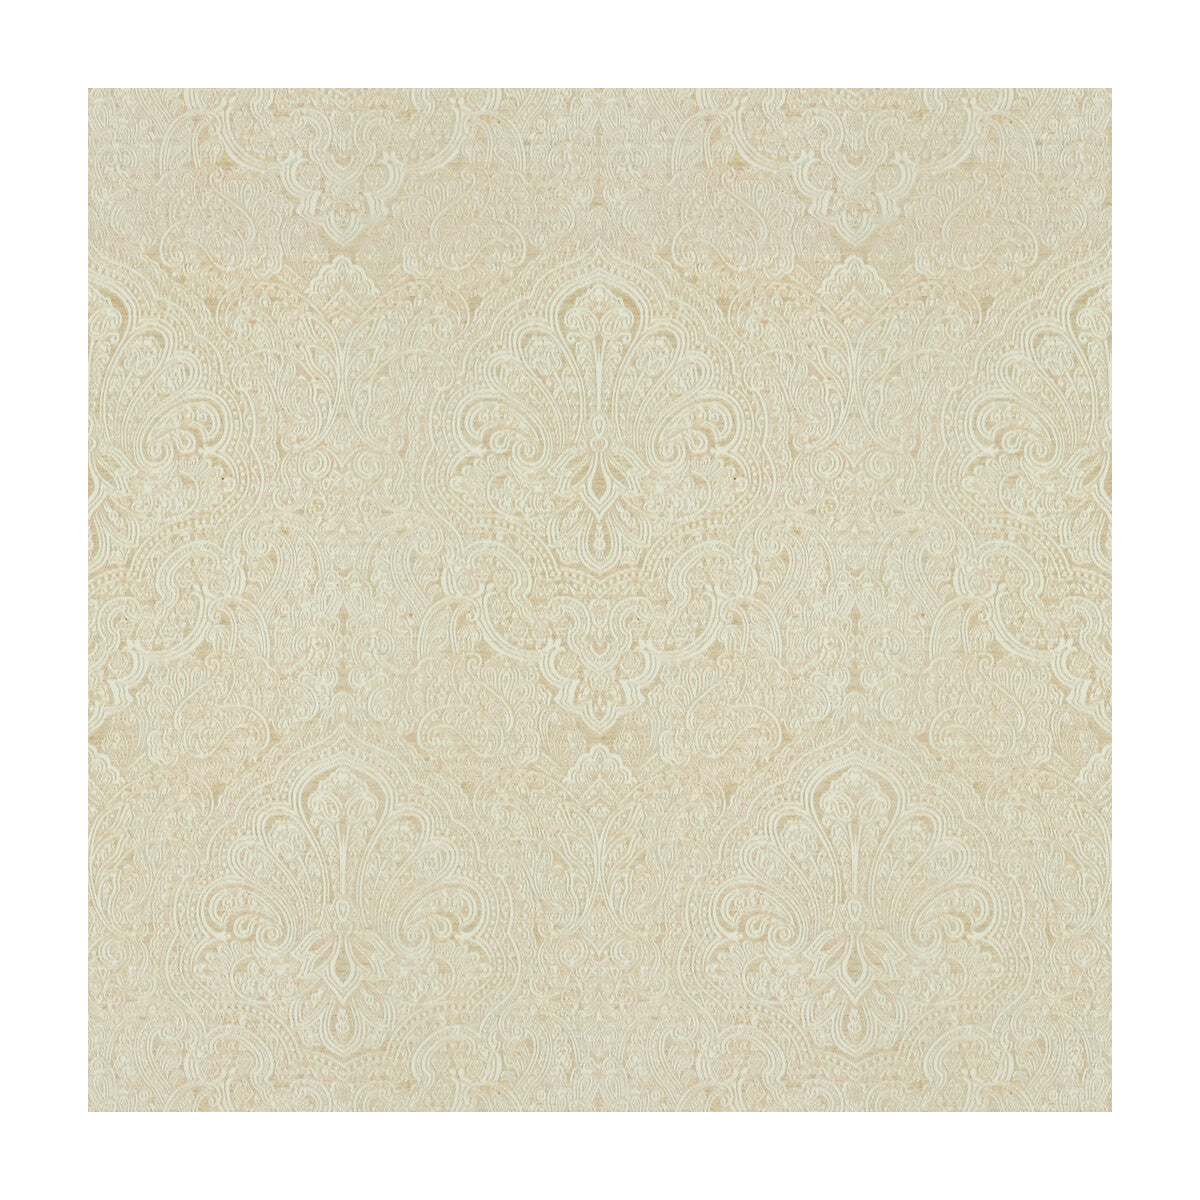 Nahanni fabric in cream color - pattern 34161.101.0 - by Kravet Design in the Candice Olson collection